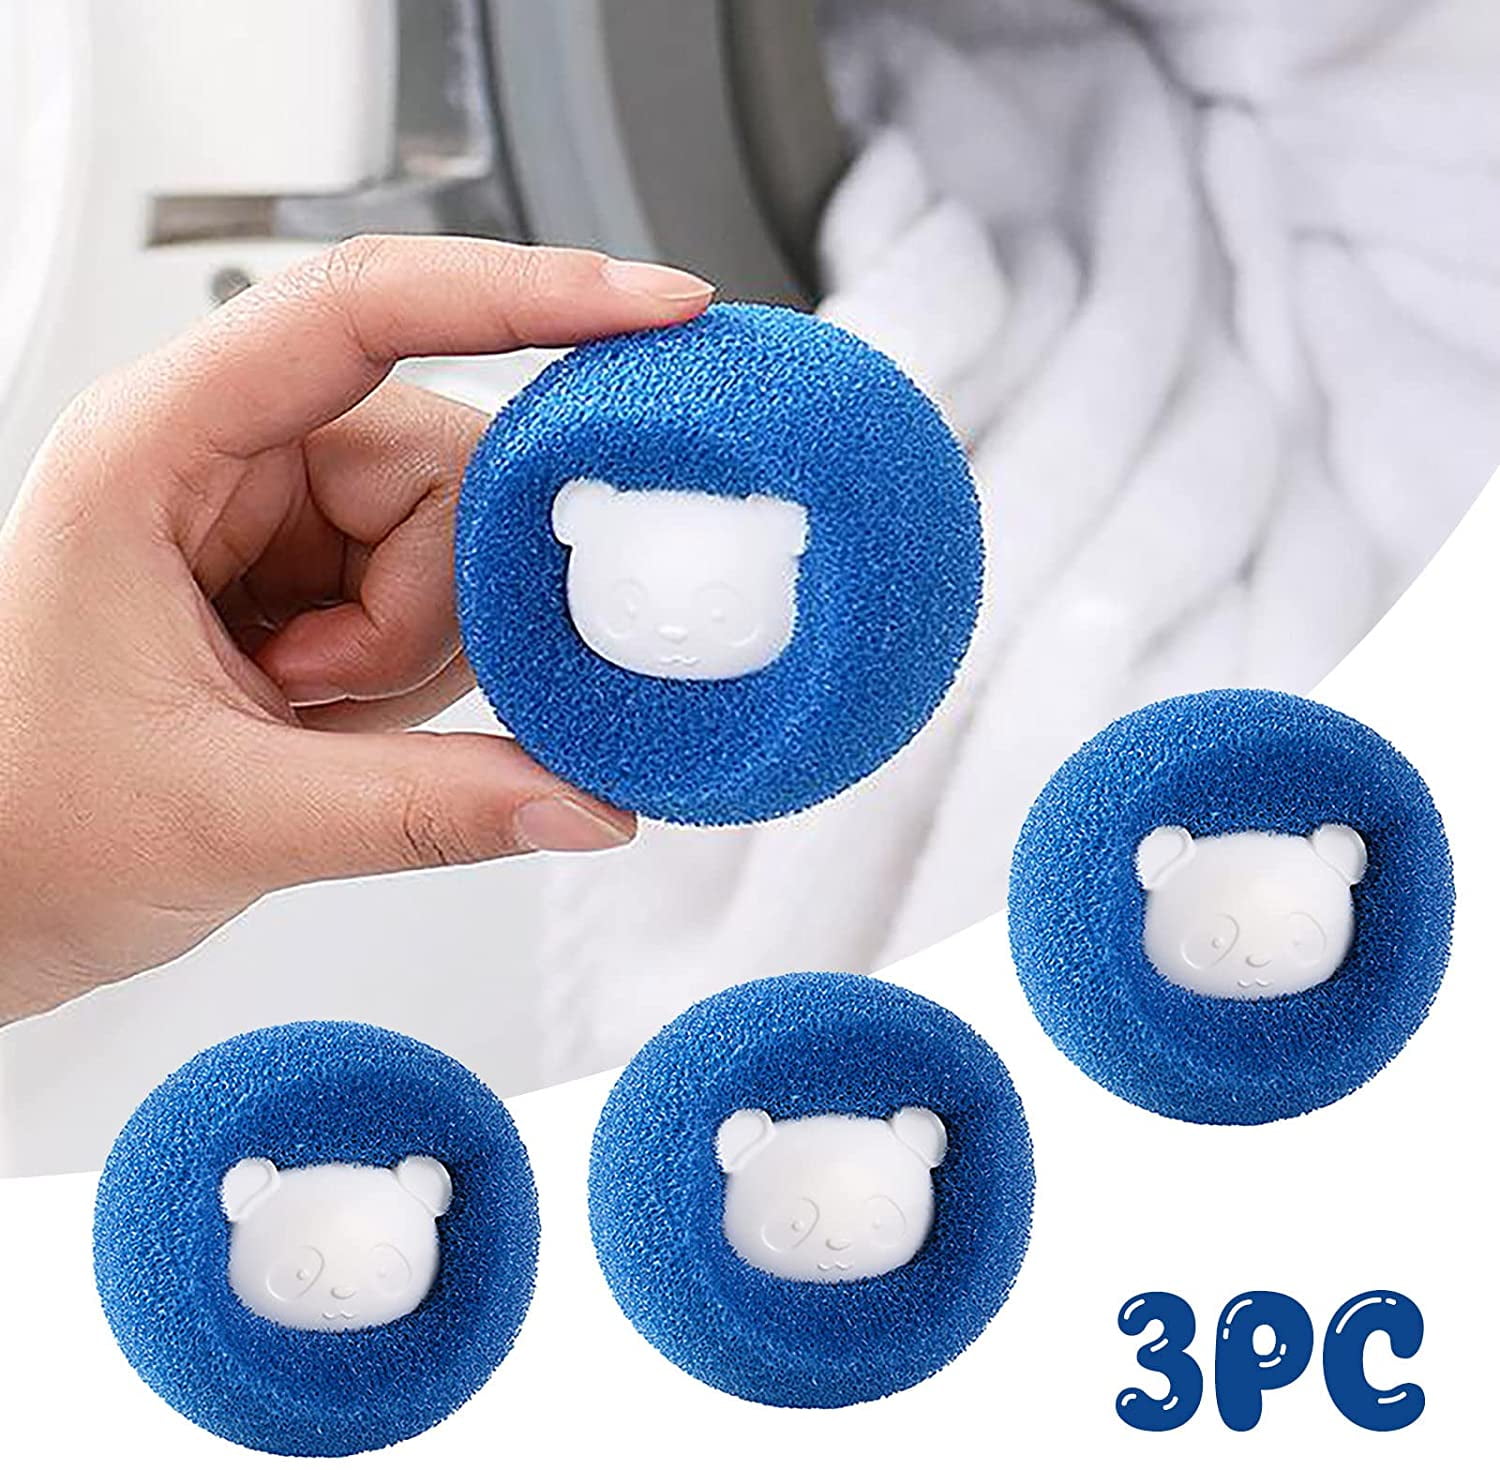 Details about   Drying Ball Fabric Softeners Strong Structure Laundry Balls Softener Oval Shaped 